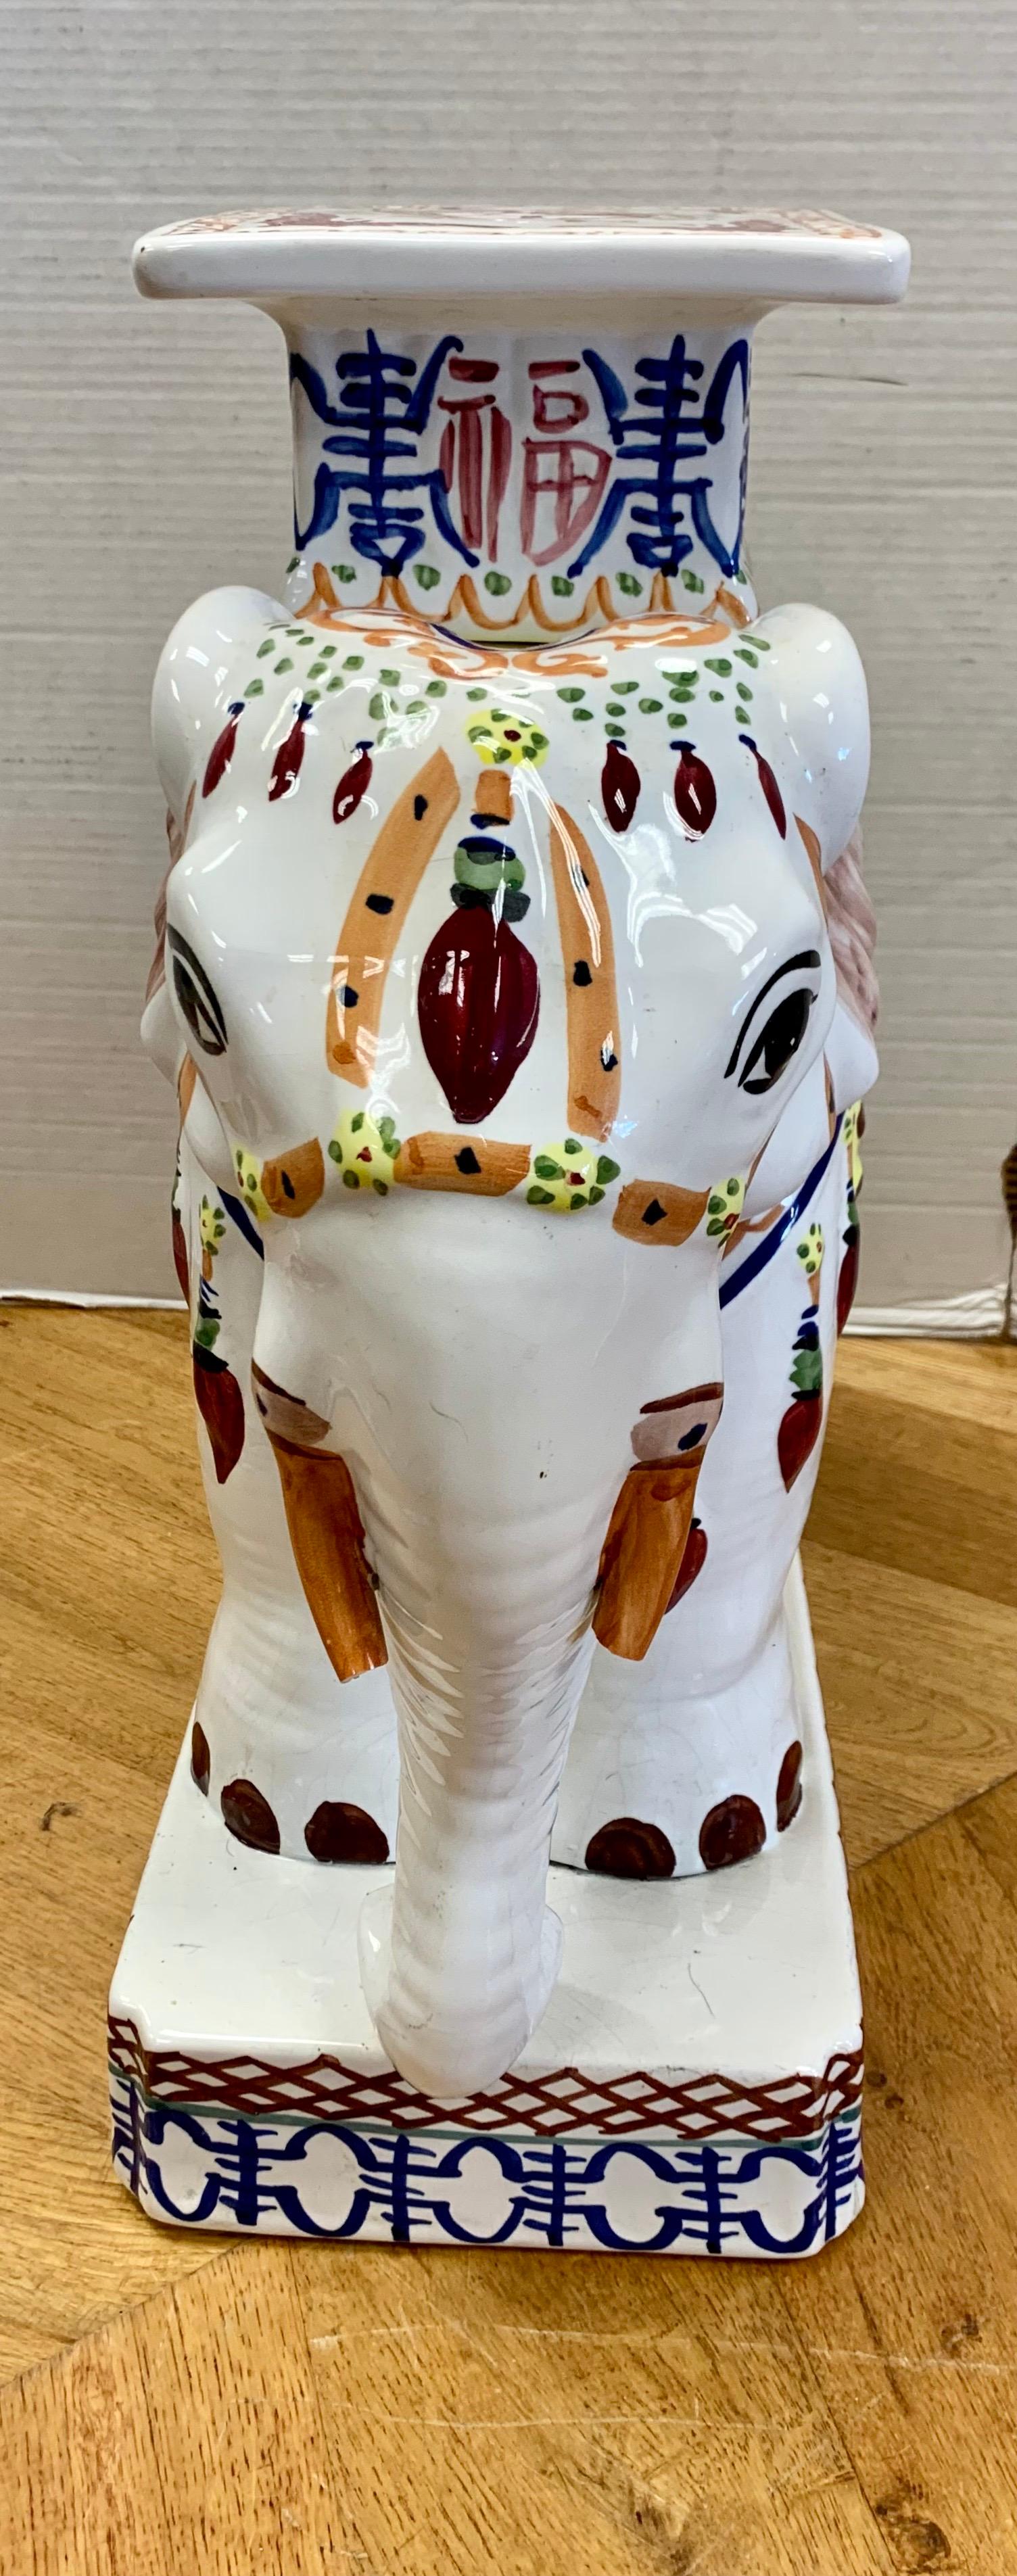 Colorful Chinese porcelain elephant garden seat stool in the shape of an elephant decorated in ornate oriental finery. It is hand painted in a colorful palette in blue, yellow, peach and white.